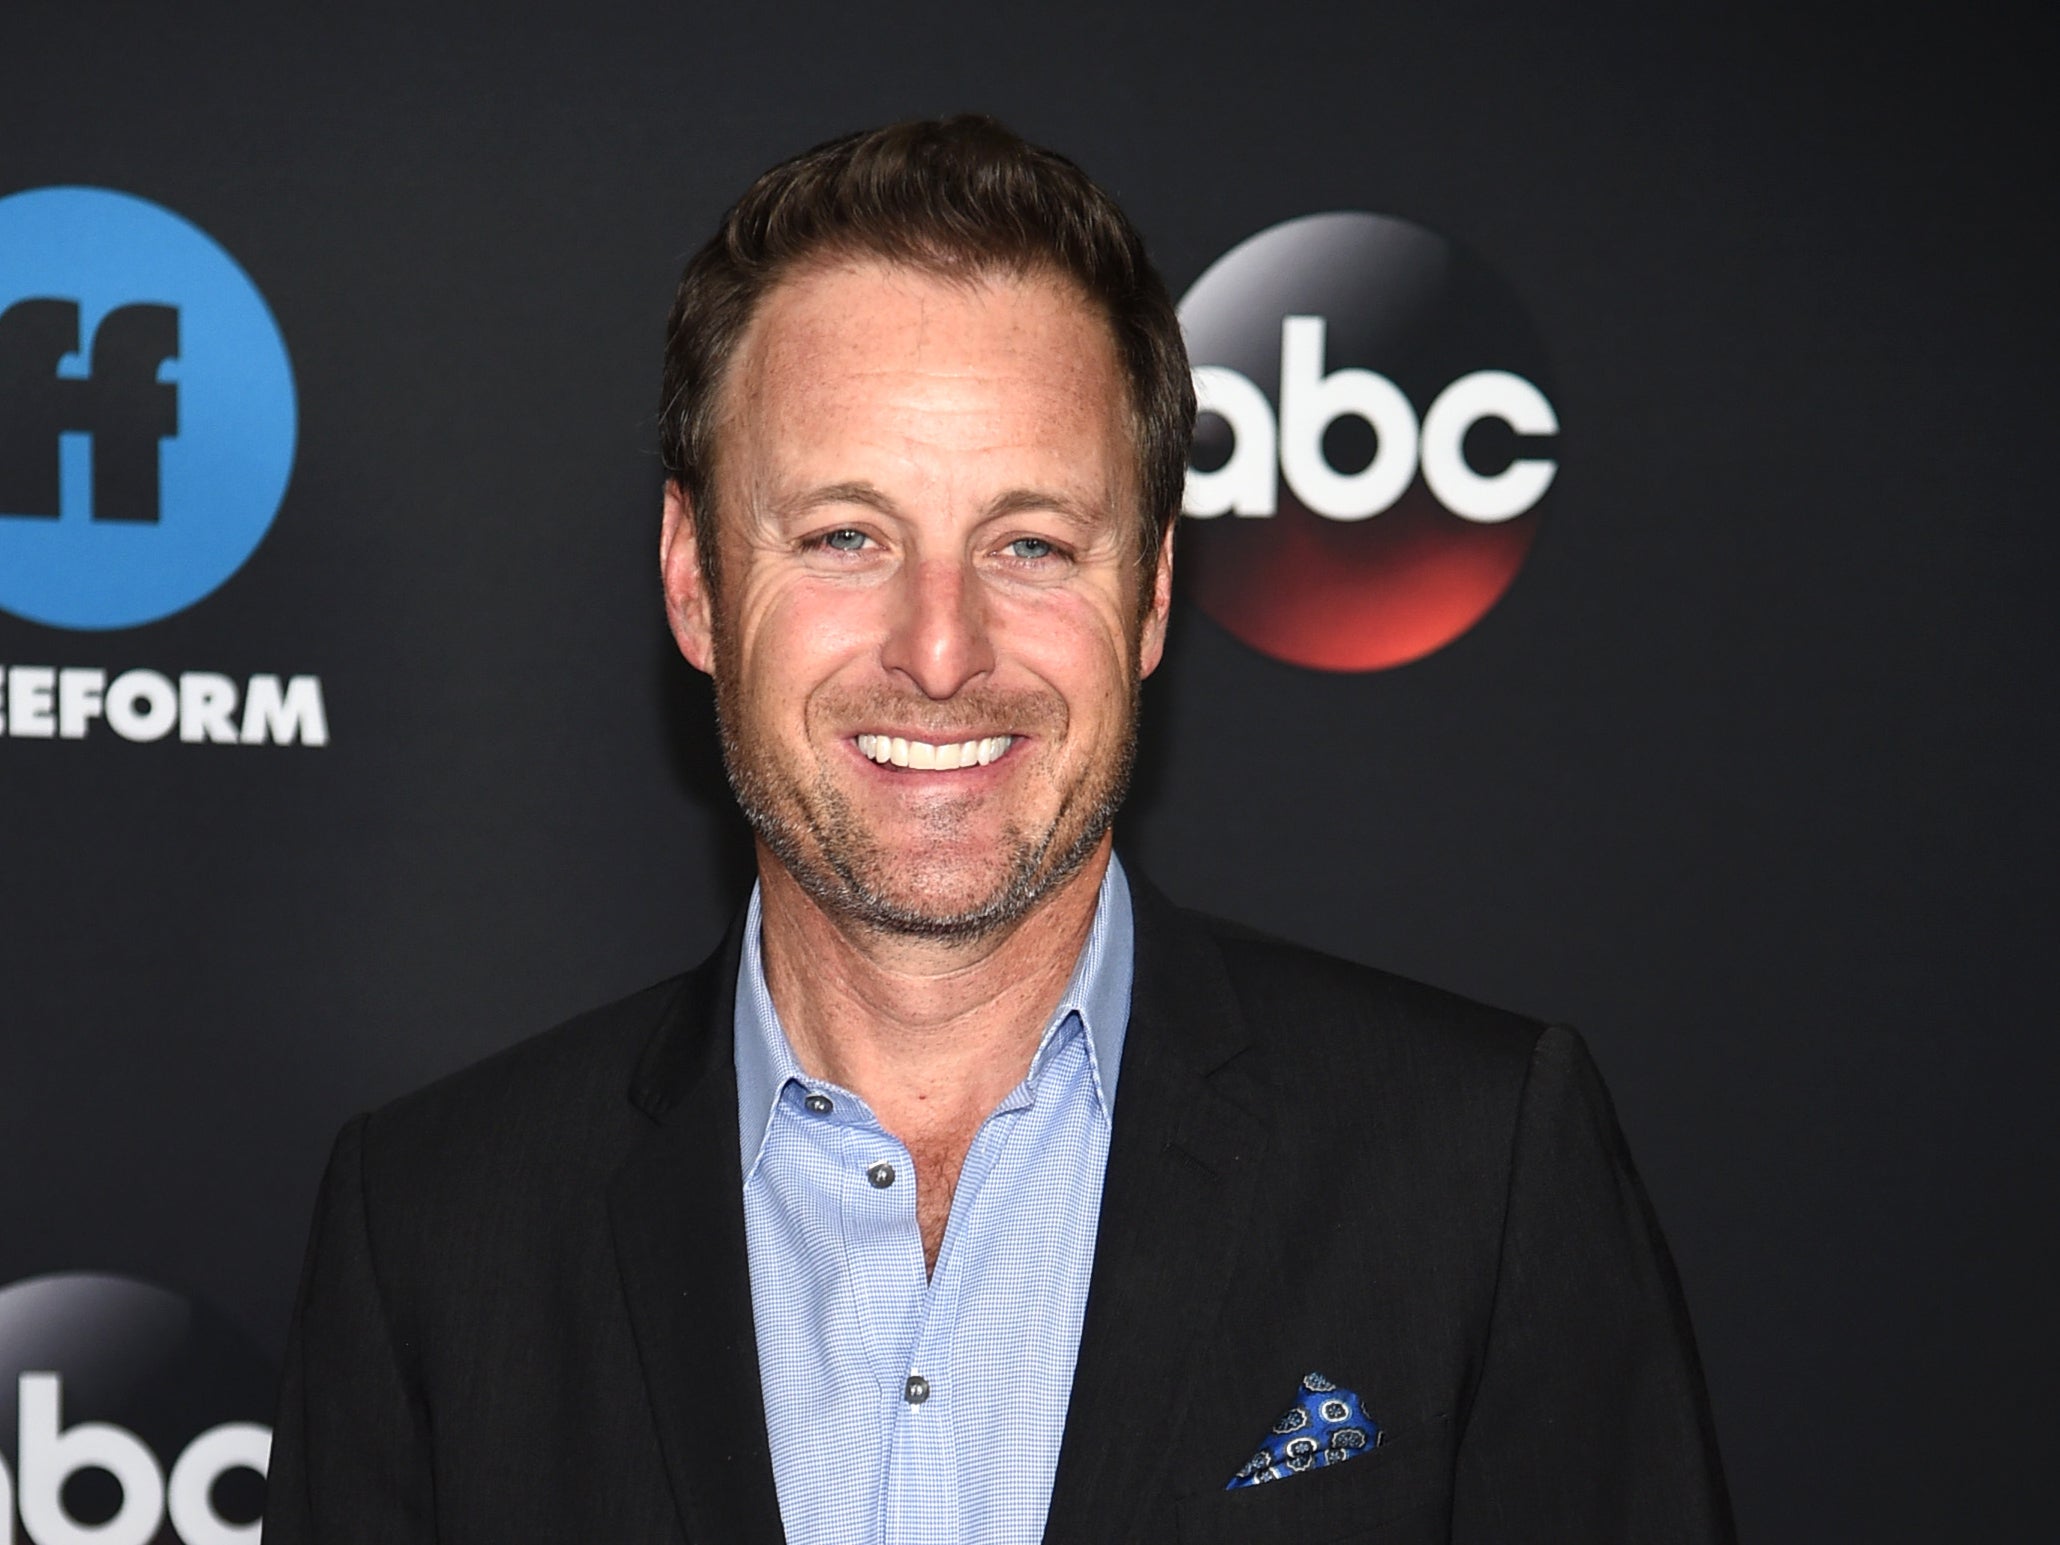 Chris Harrison at an event on 15 May 2018 in New York City